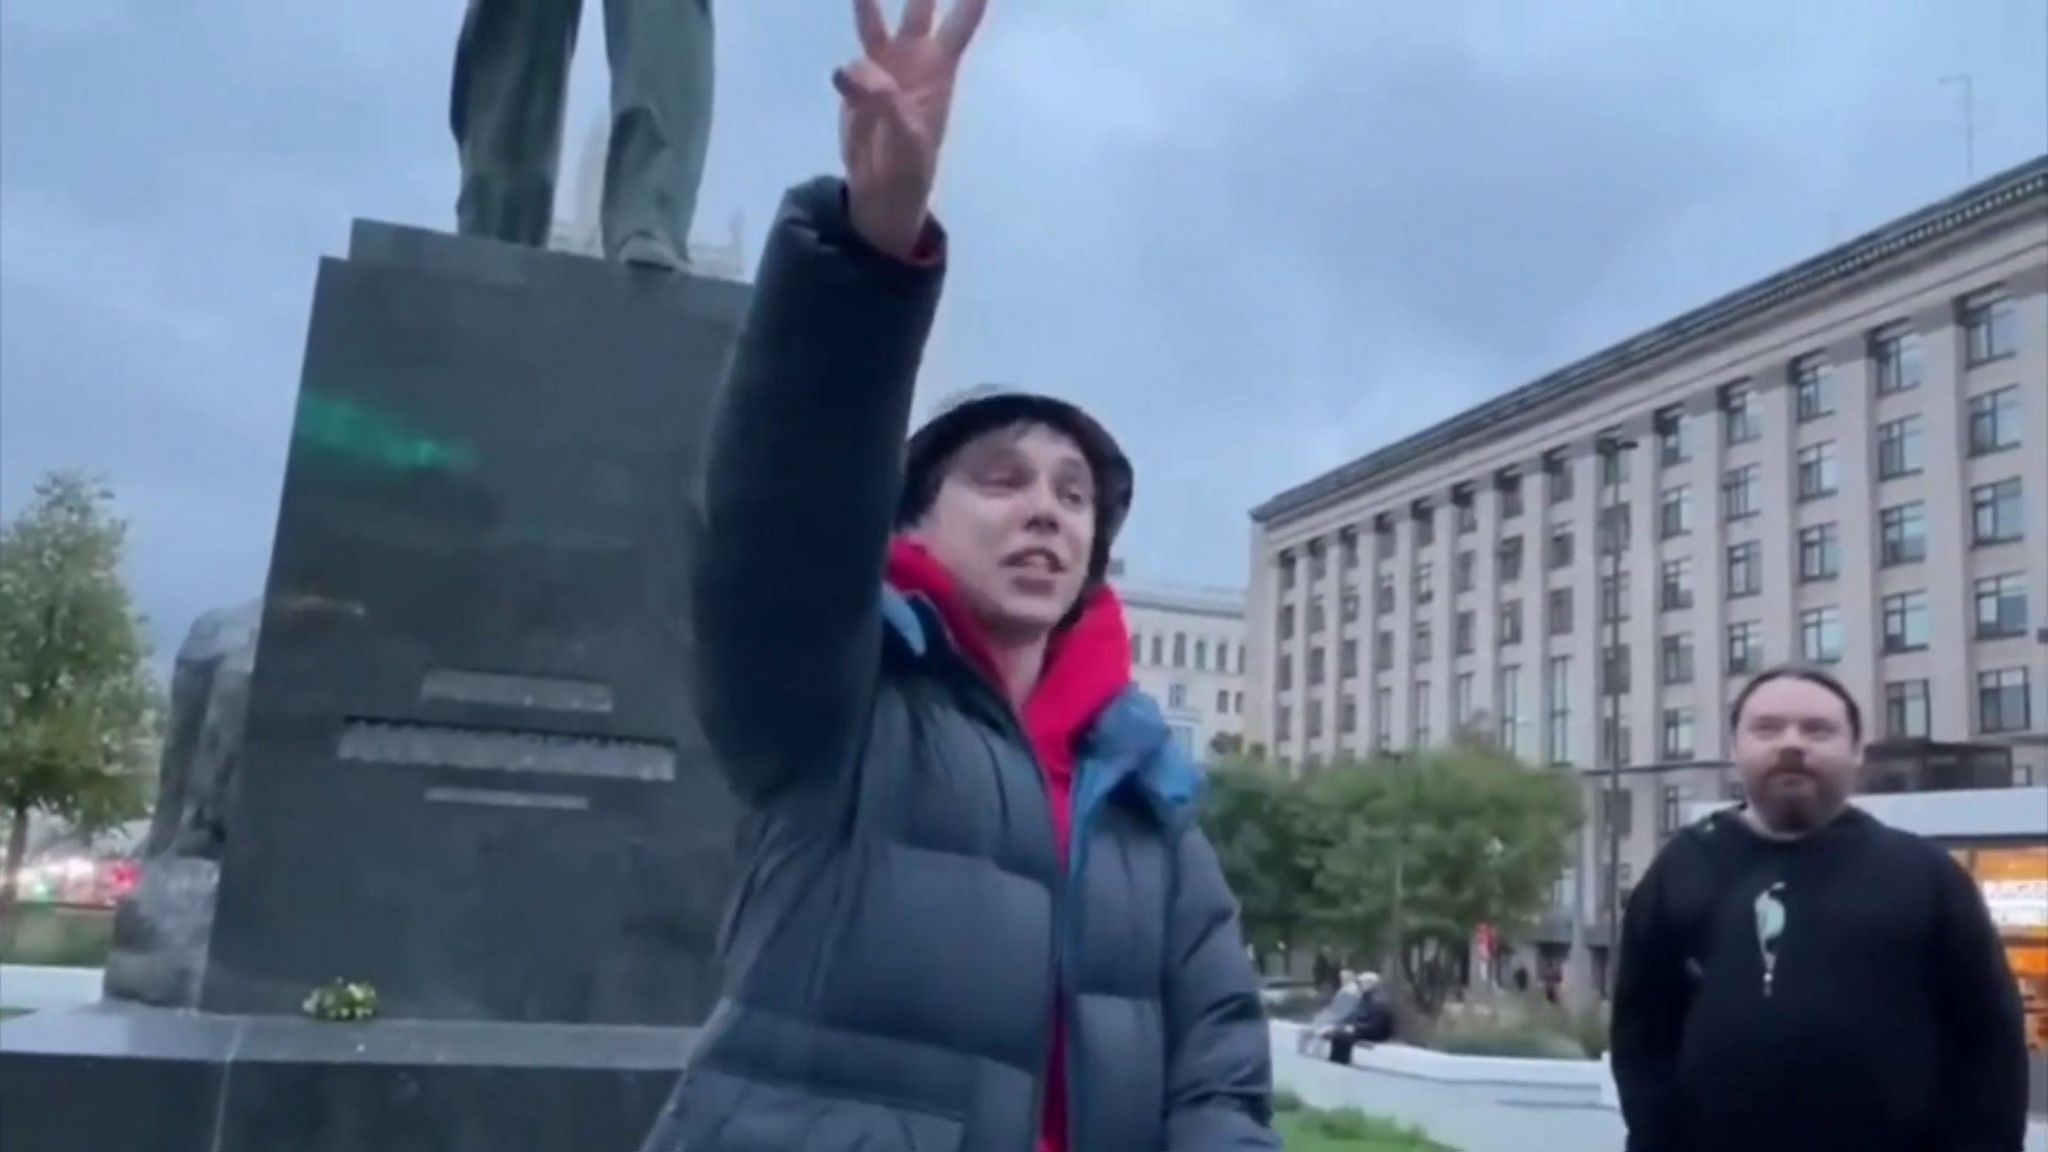 Artyom Kamardin holds up the peace sign in Triumfalnaya Square on an overcast Moscow day